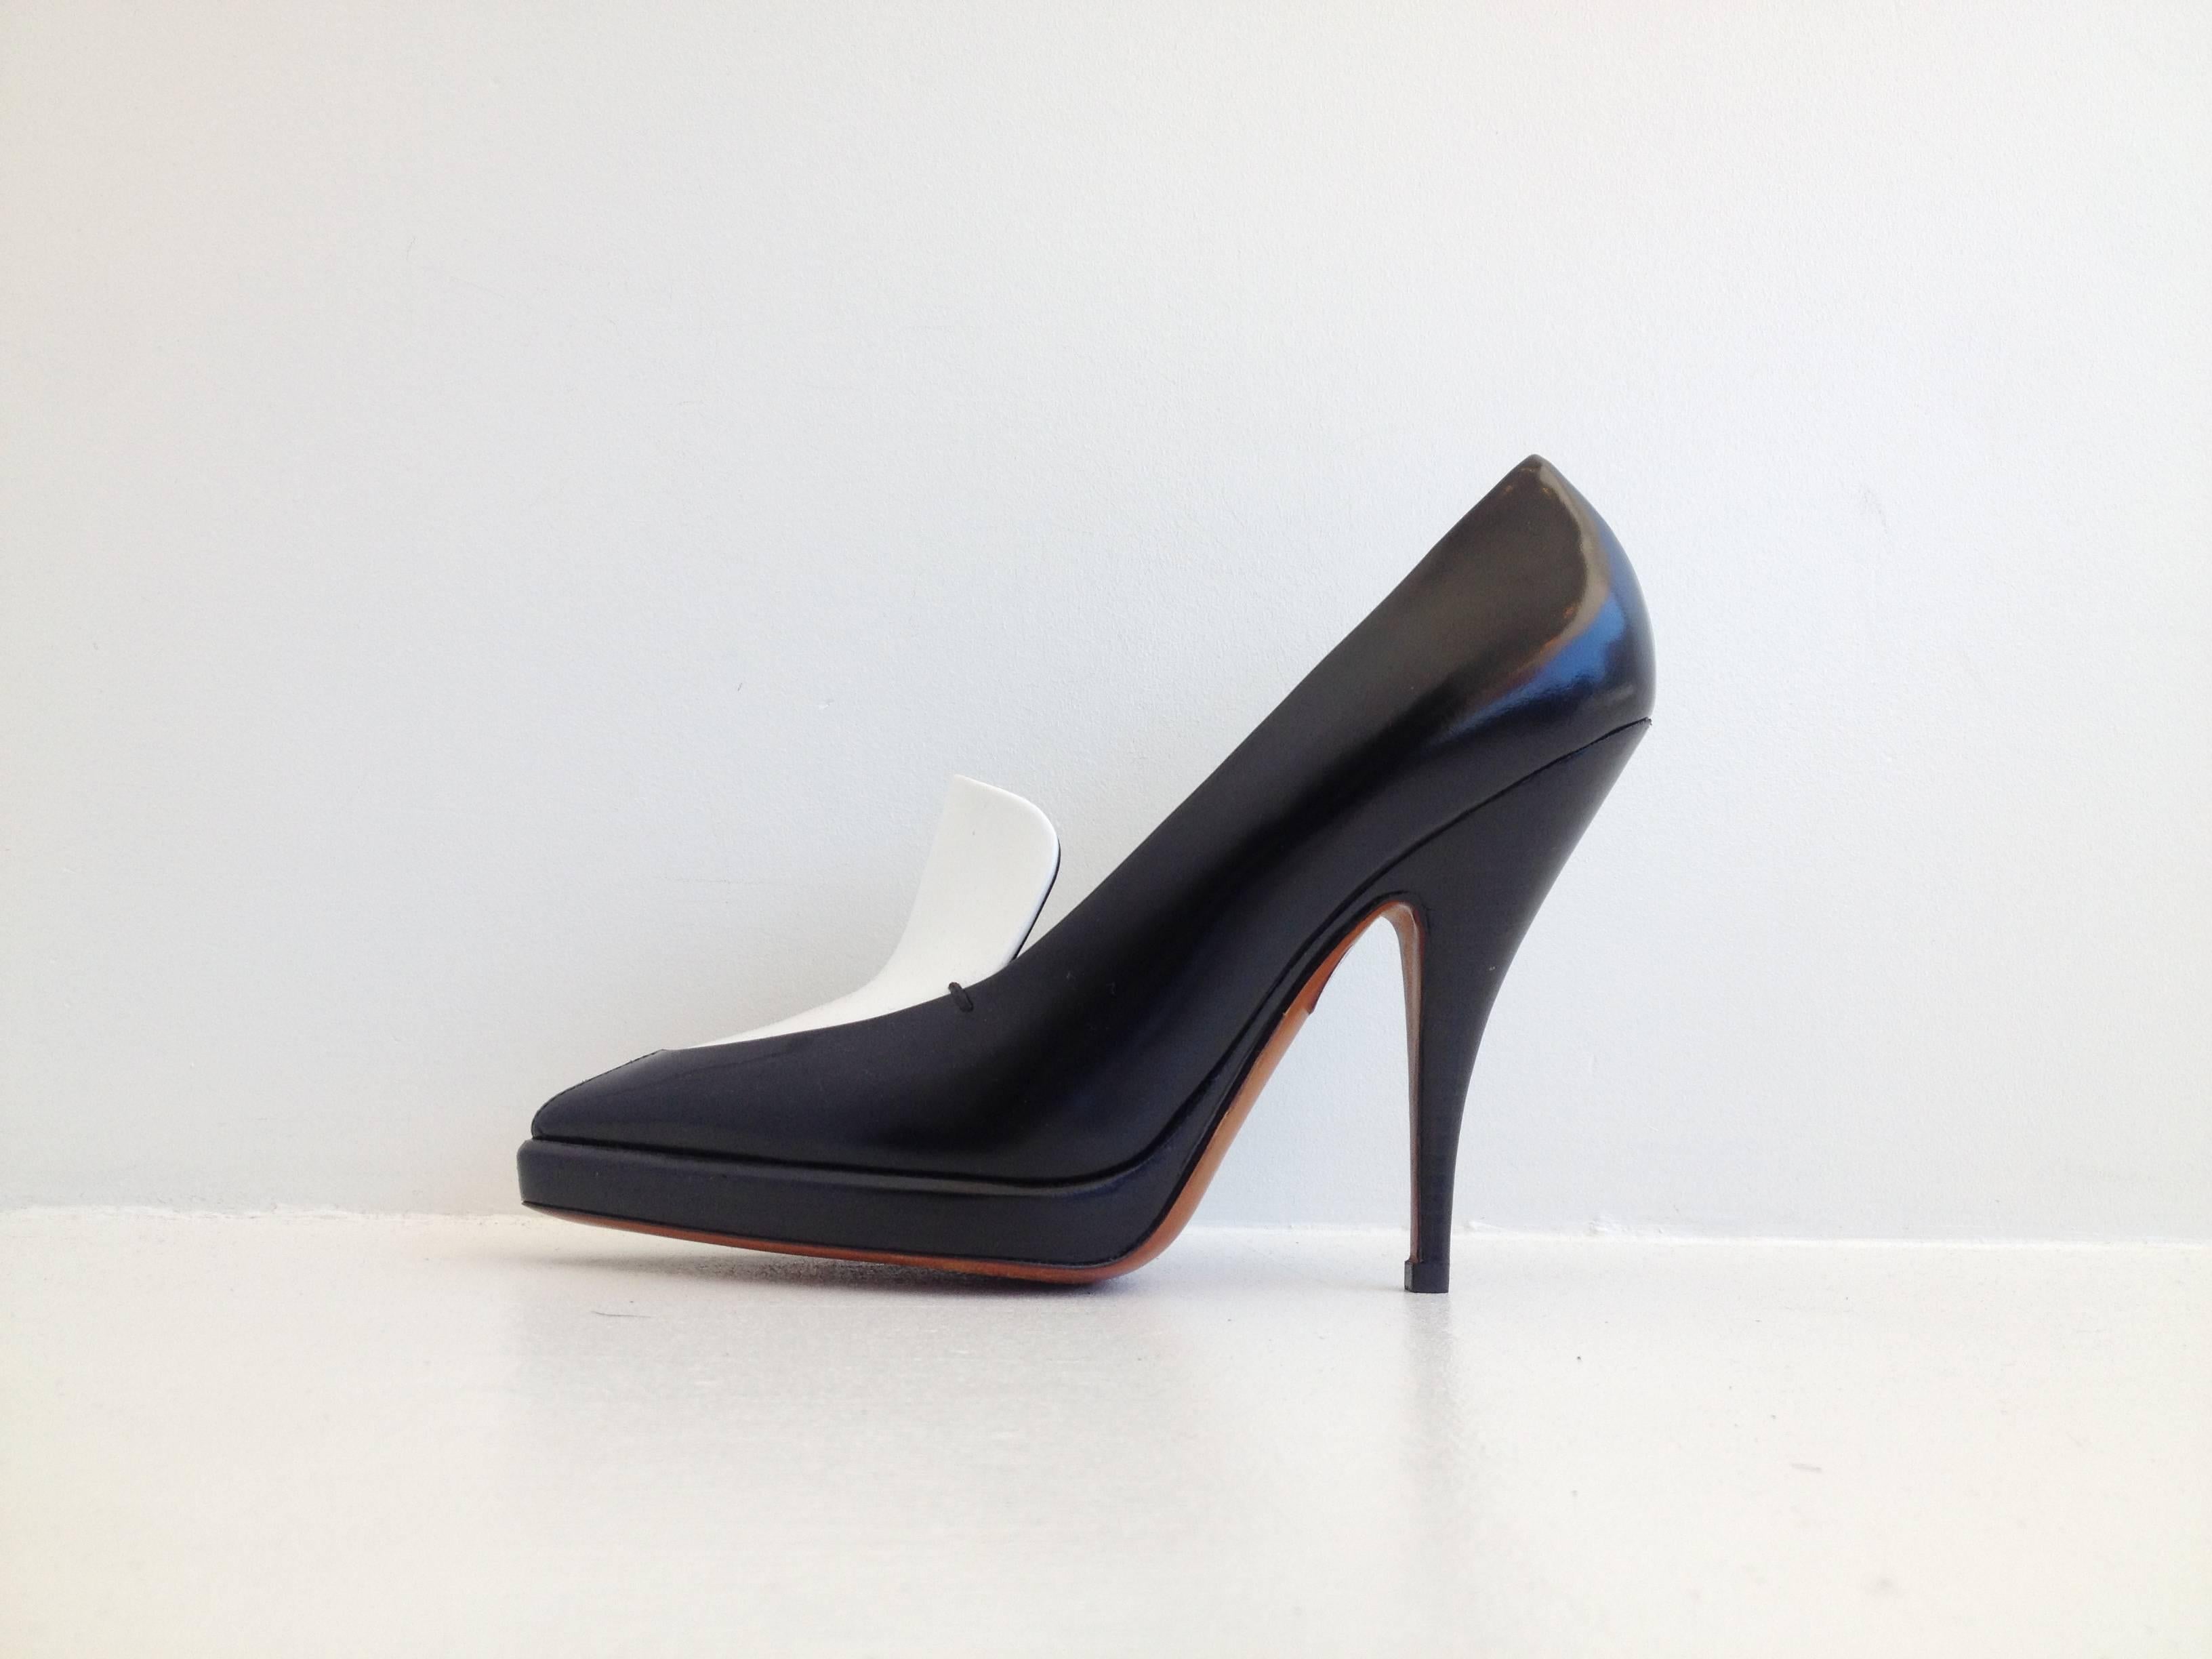 High contrast black and white makes a very bold shoe, and this pair by Celine is dramatic and sleek. The cut has both angles and curves, with the smooth white panel in the front coming to a point at the toe and a tapering 4.5 inch heel. The front